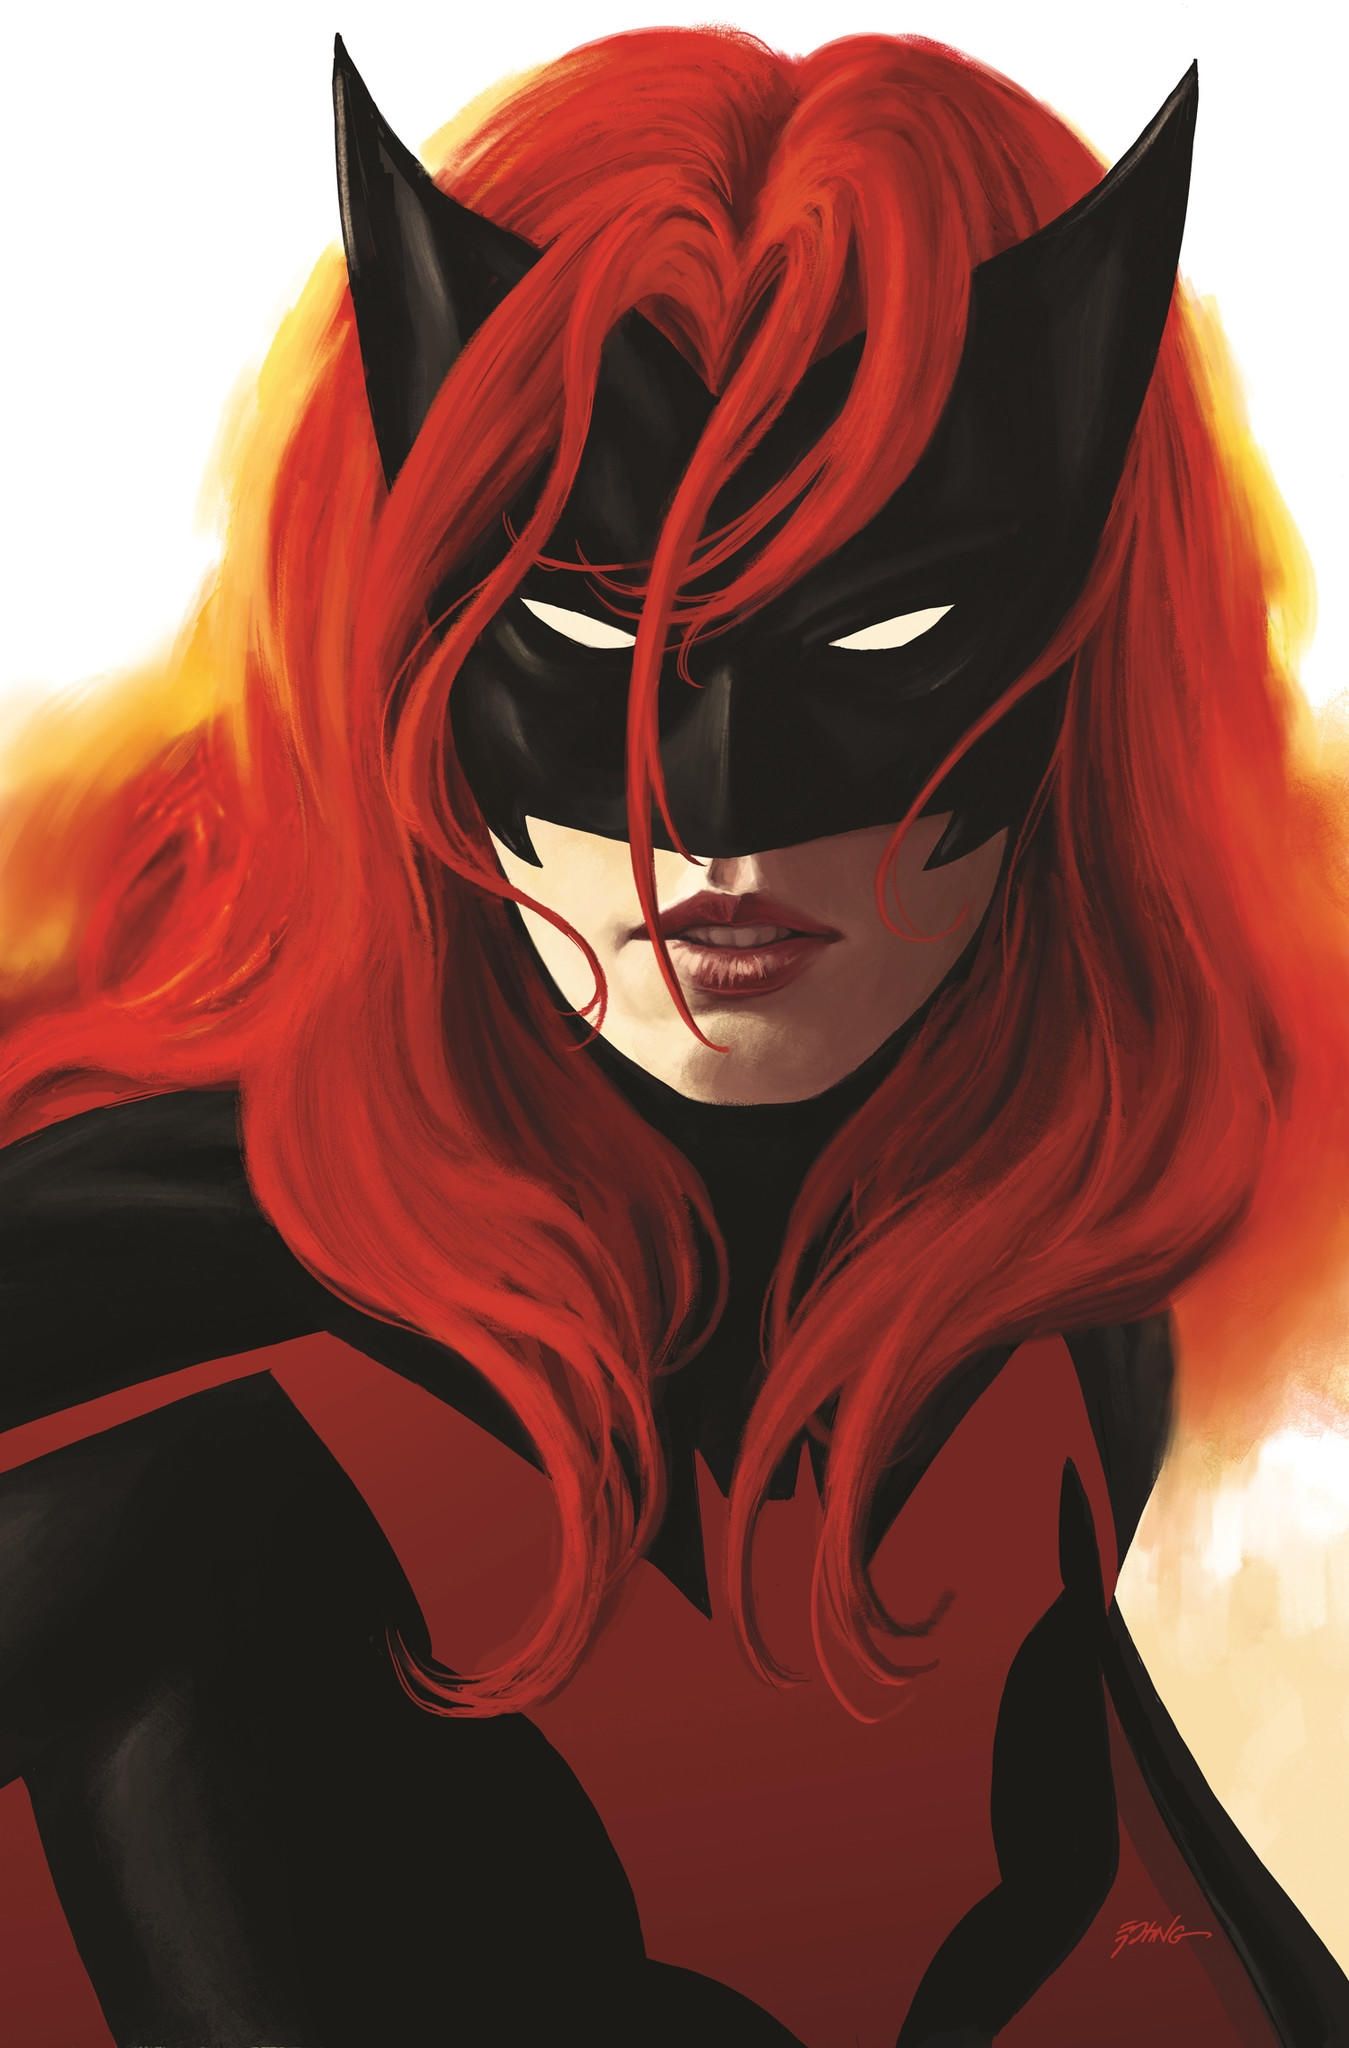 New Batwoman Solo Comic Coming From DC